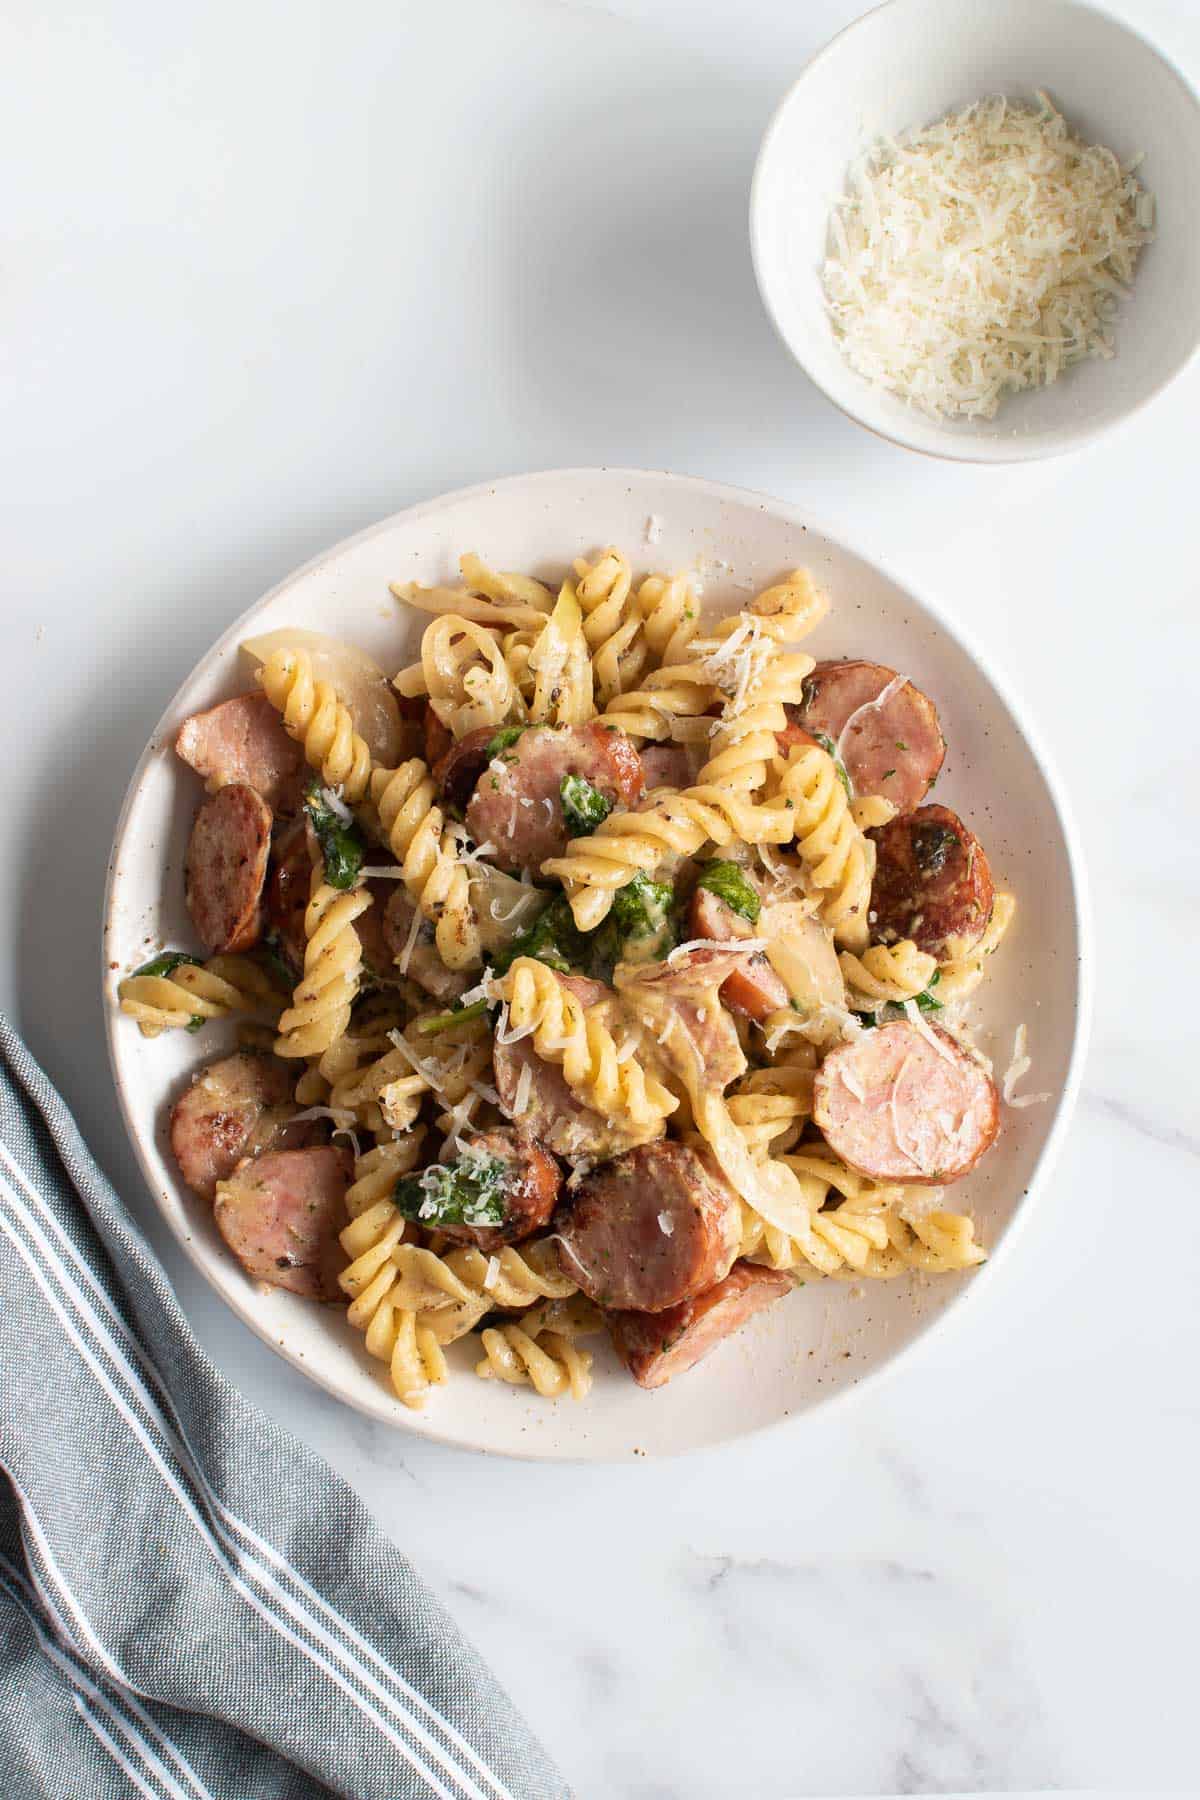 A plate of kielbasa pasta with Parmesan on the side.